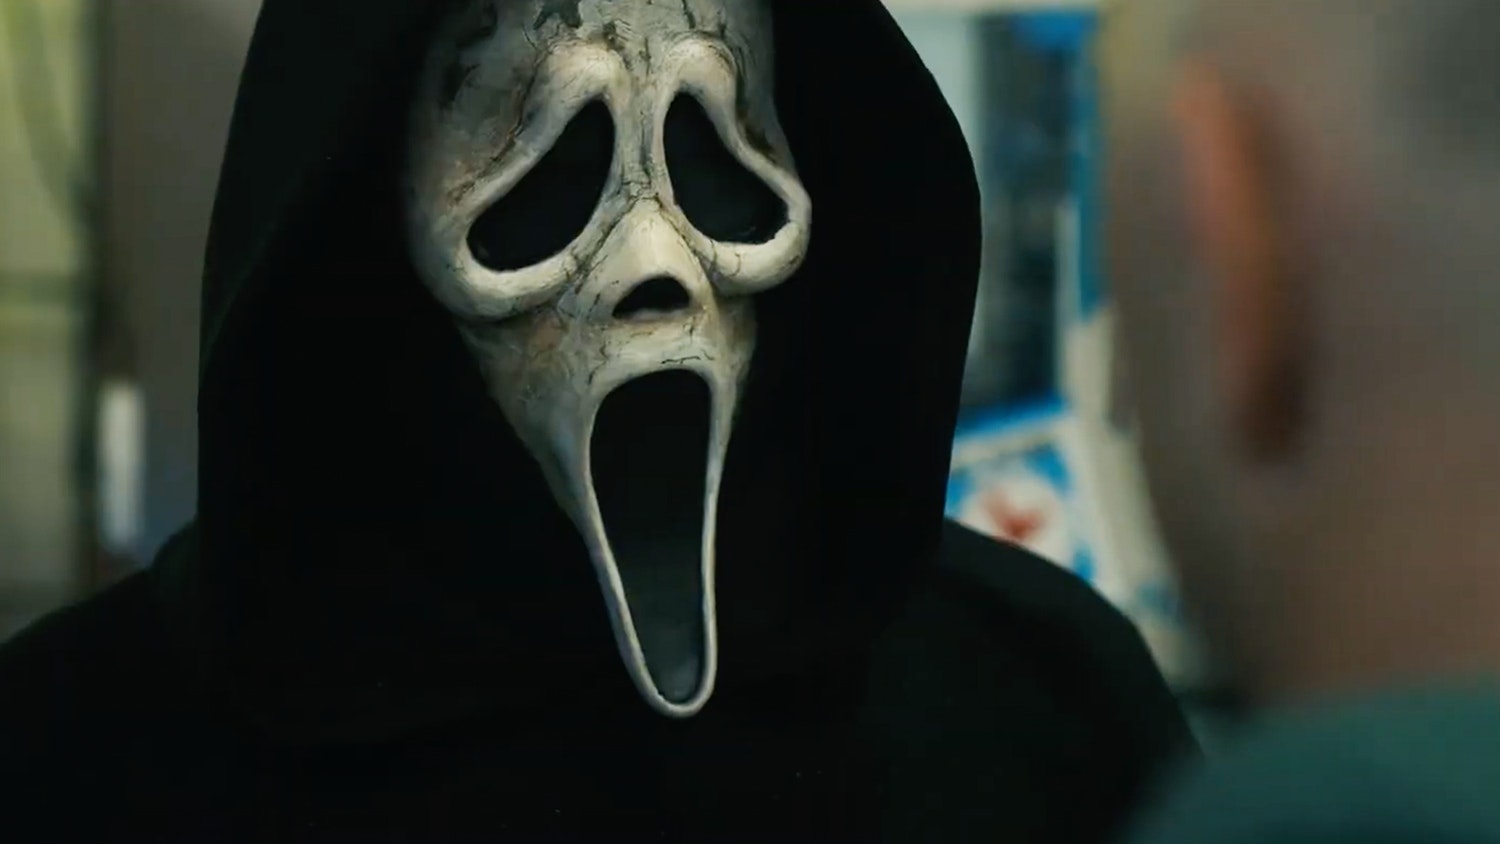 Scream 6' Ending Explained: Who Is Ghostface and What Do They Want?